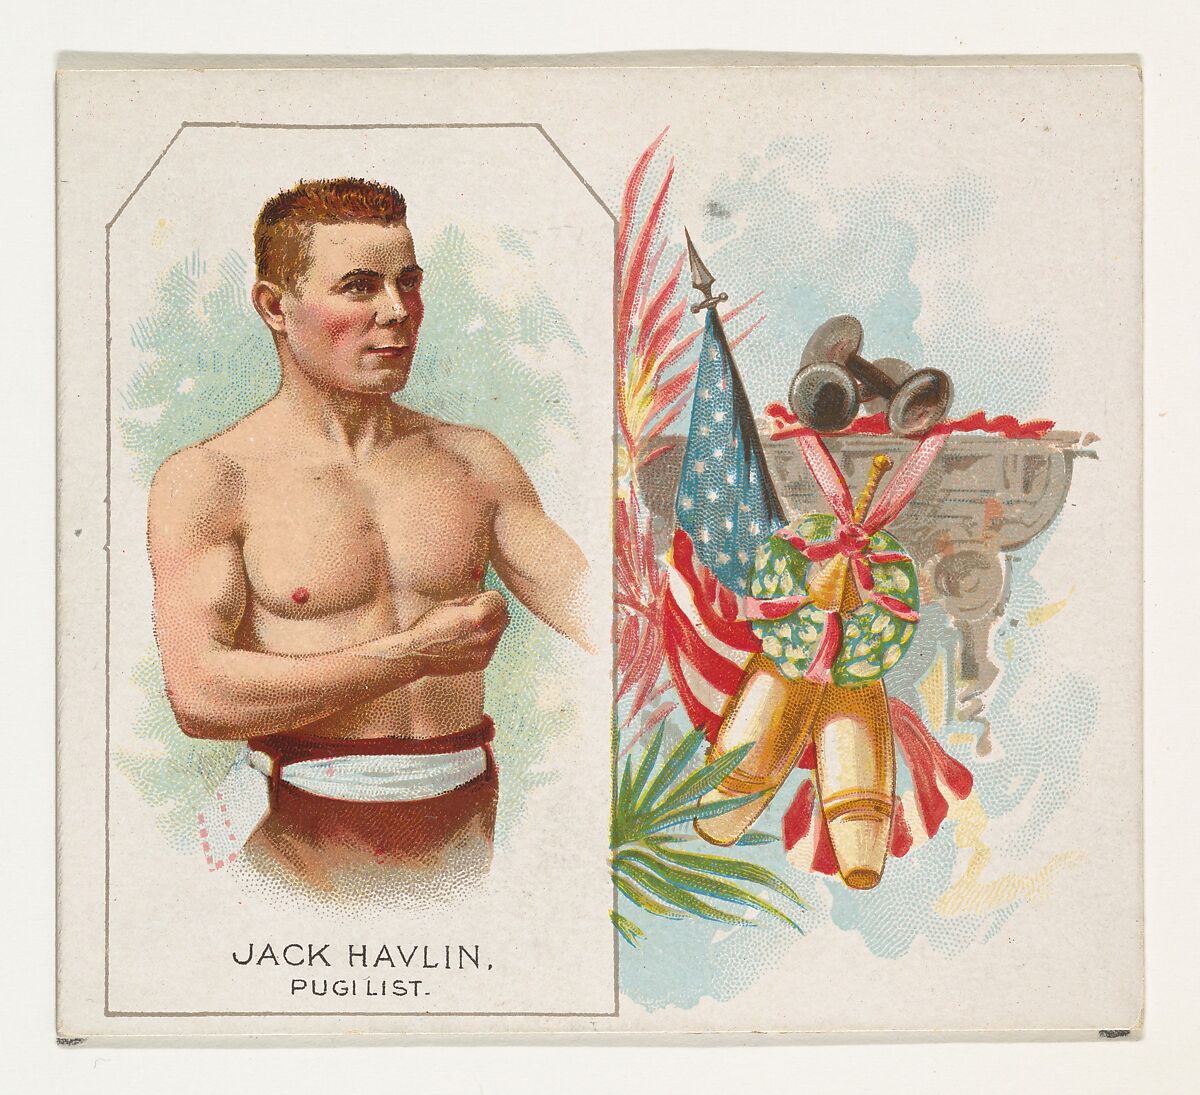 Jack Havlin, Pugilist, from World's Champions, Second Series (N43) for Allen & Ginter Cigarettes, Allen &amp; Ginter (American, Richmond, Virginia), Commercial lithograph 